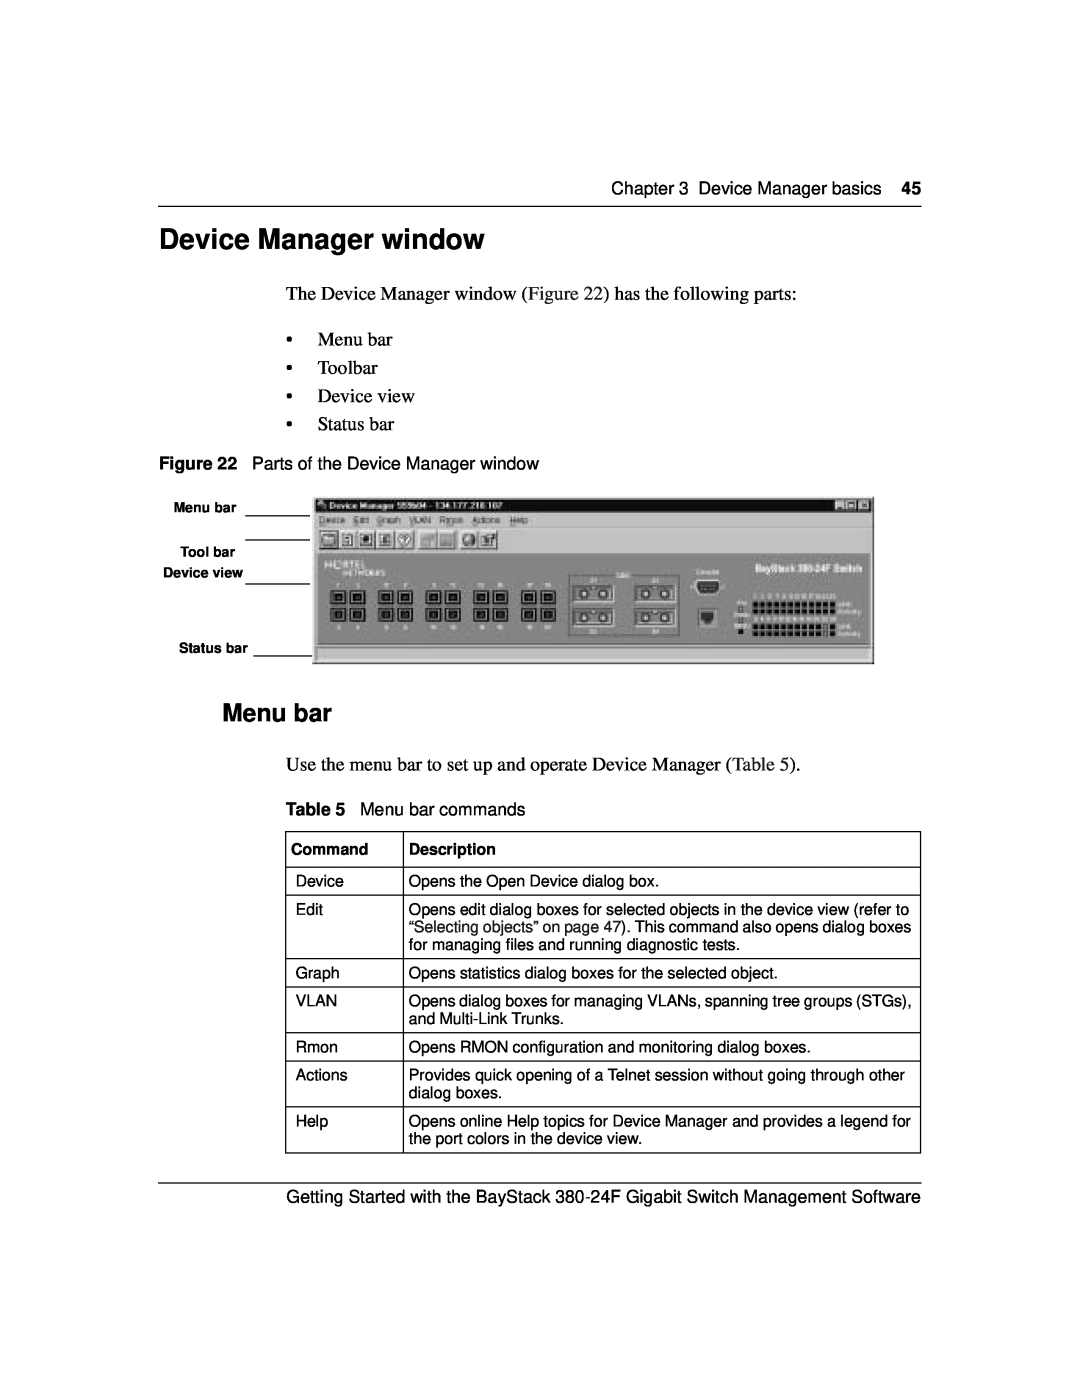 Nortel Networks 380-24F Device Manager basics, Parts of the Device Manager window, Menu bar commands, Command 